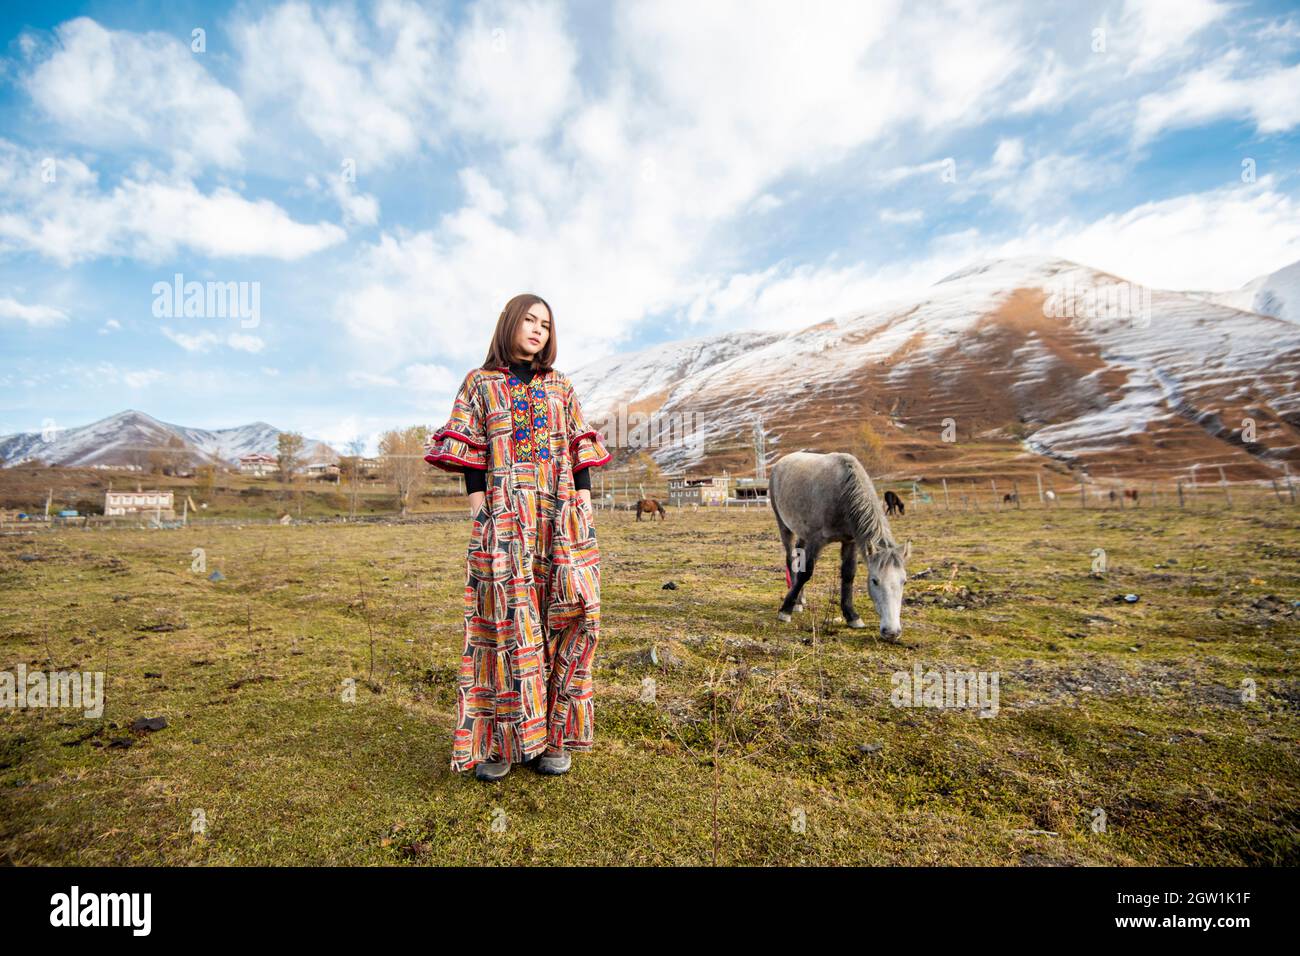 Portrait Of Woman Standing On Field Against Snowcapped Mountains Stock Photo